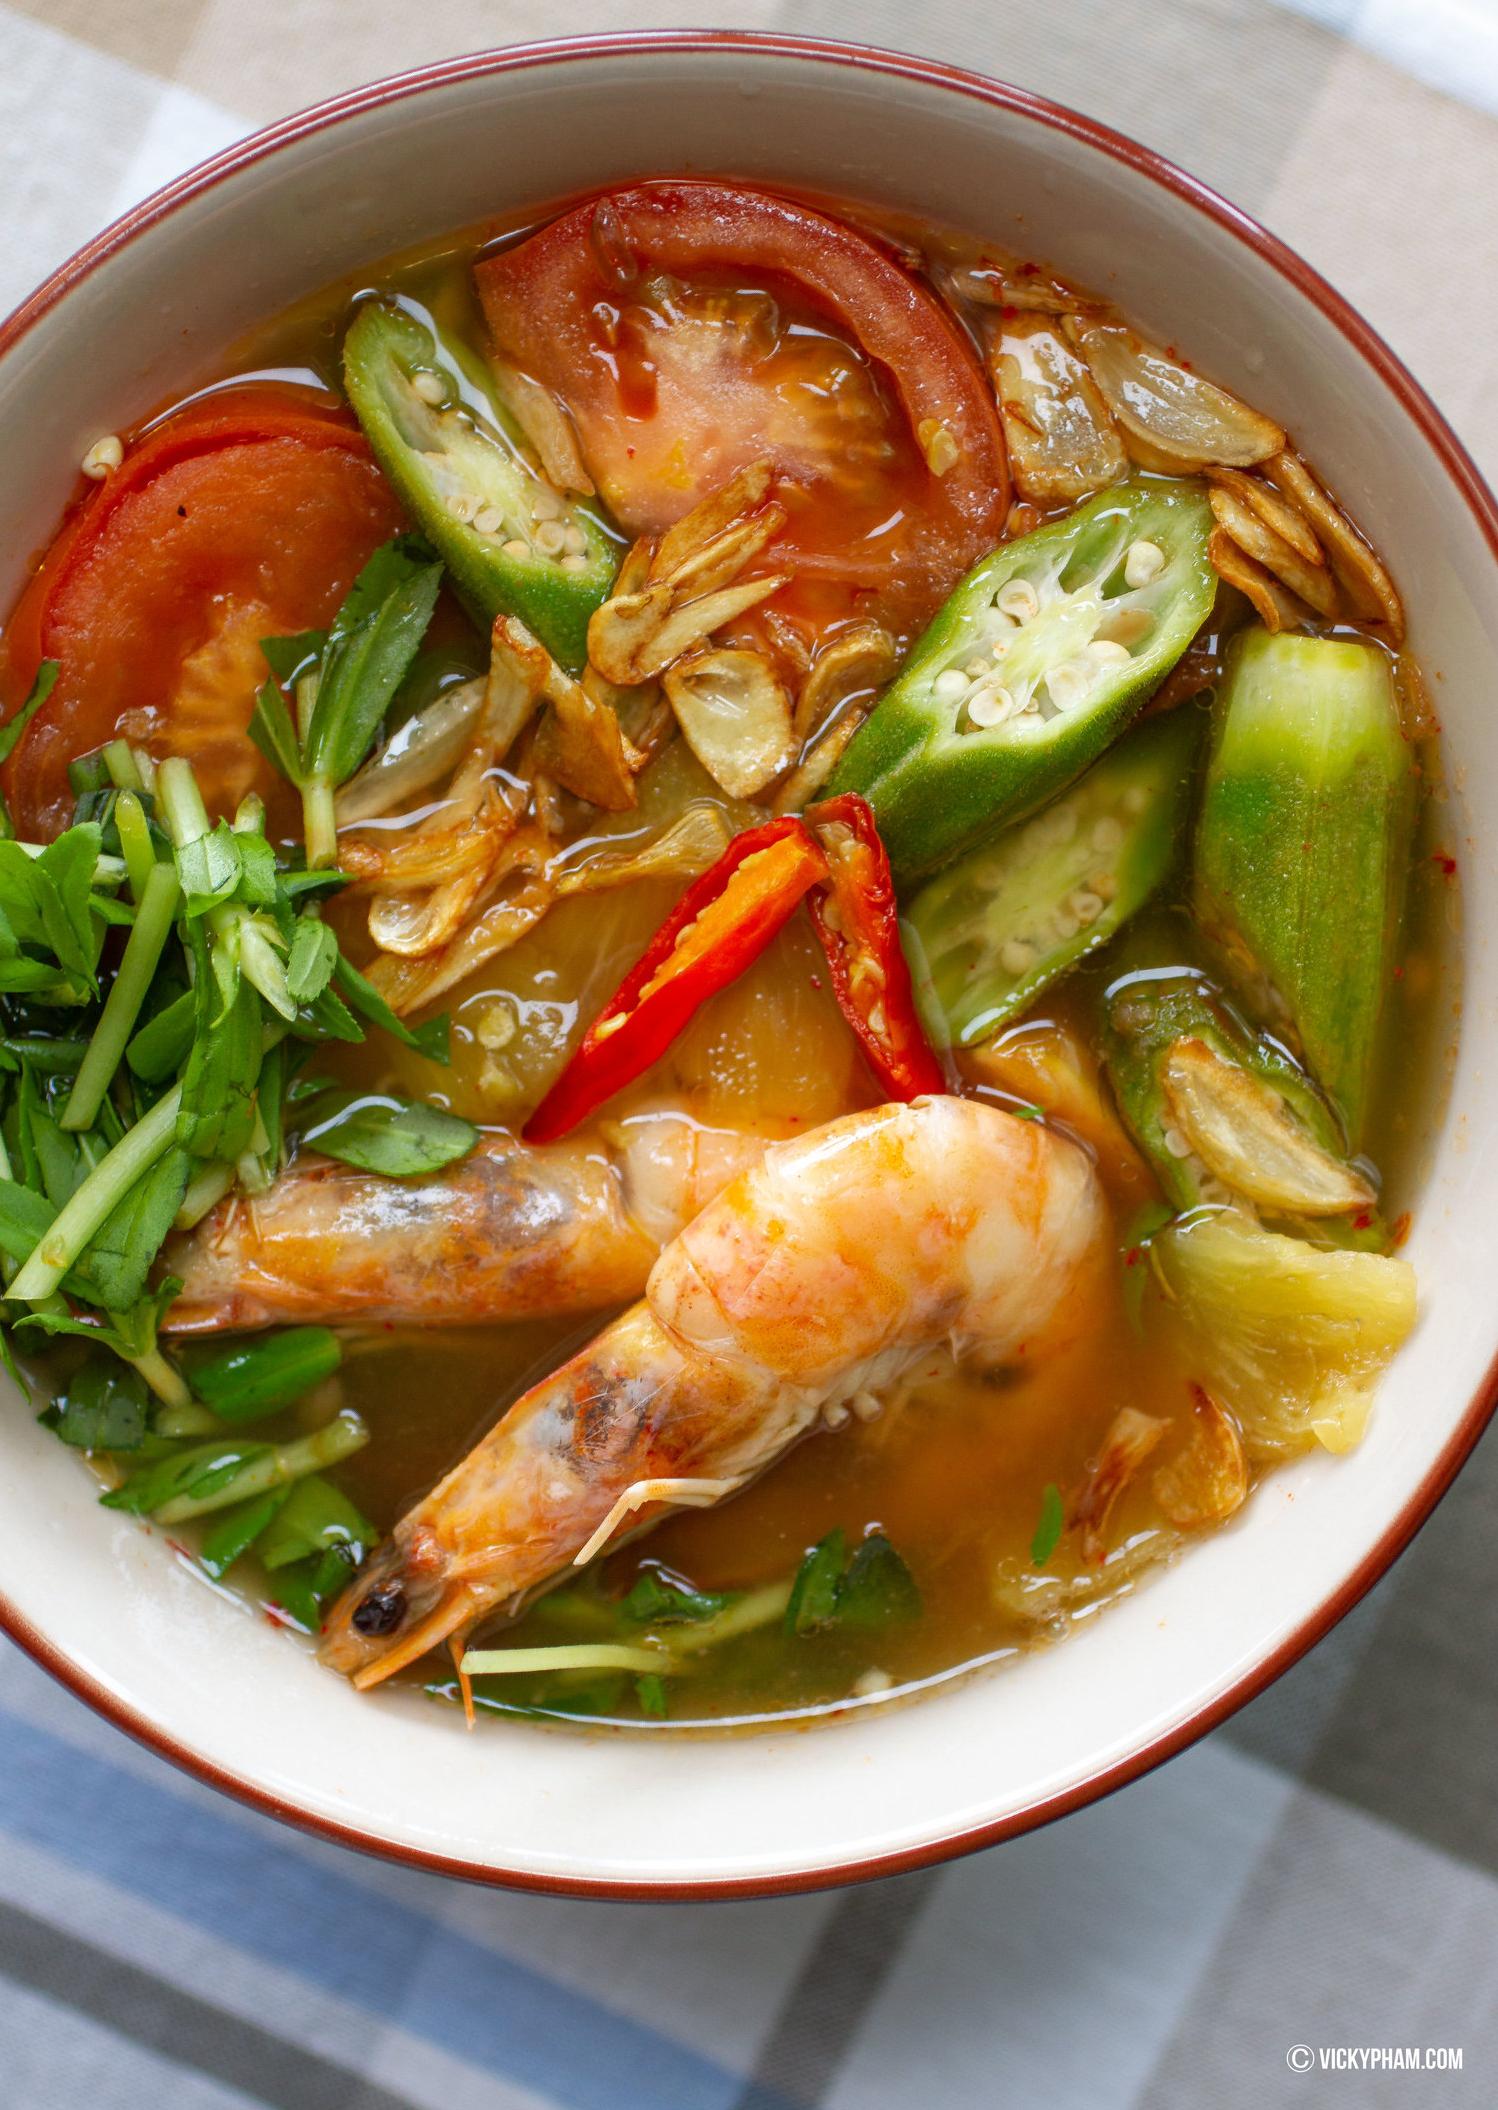  Imagine a cozy bowl of steaming broth filled with delicate rice noodles, juicy shrimp, and tangy veggies. That's what you'll get with this recipe.